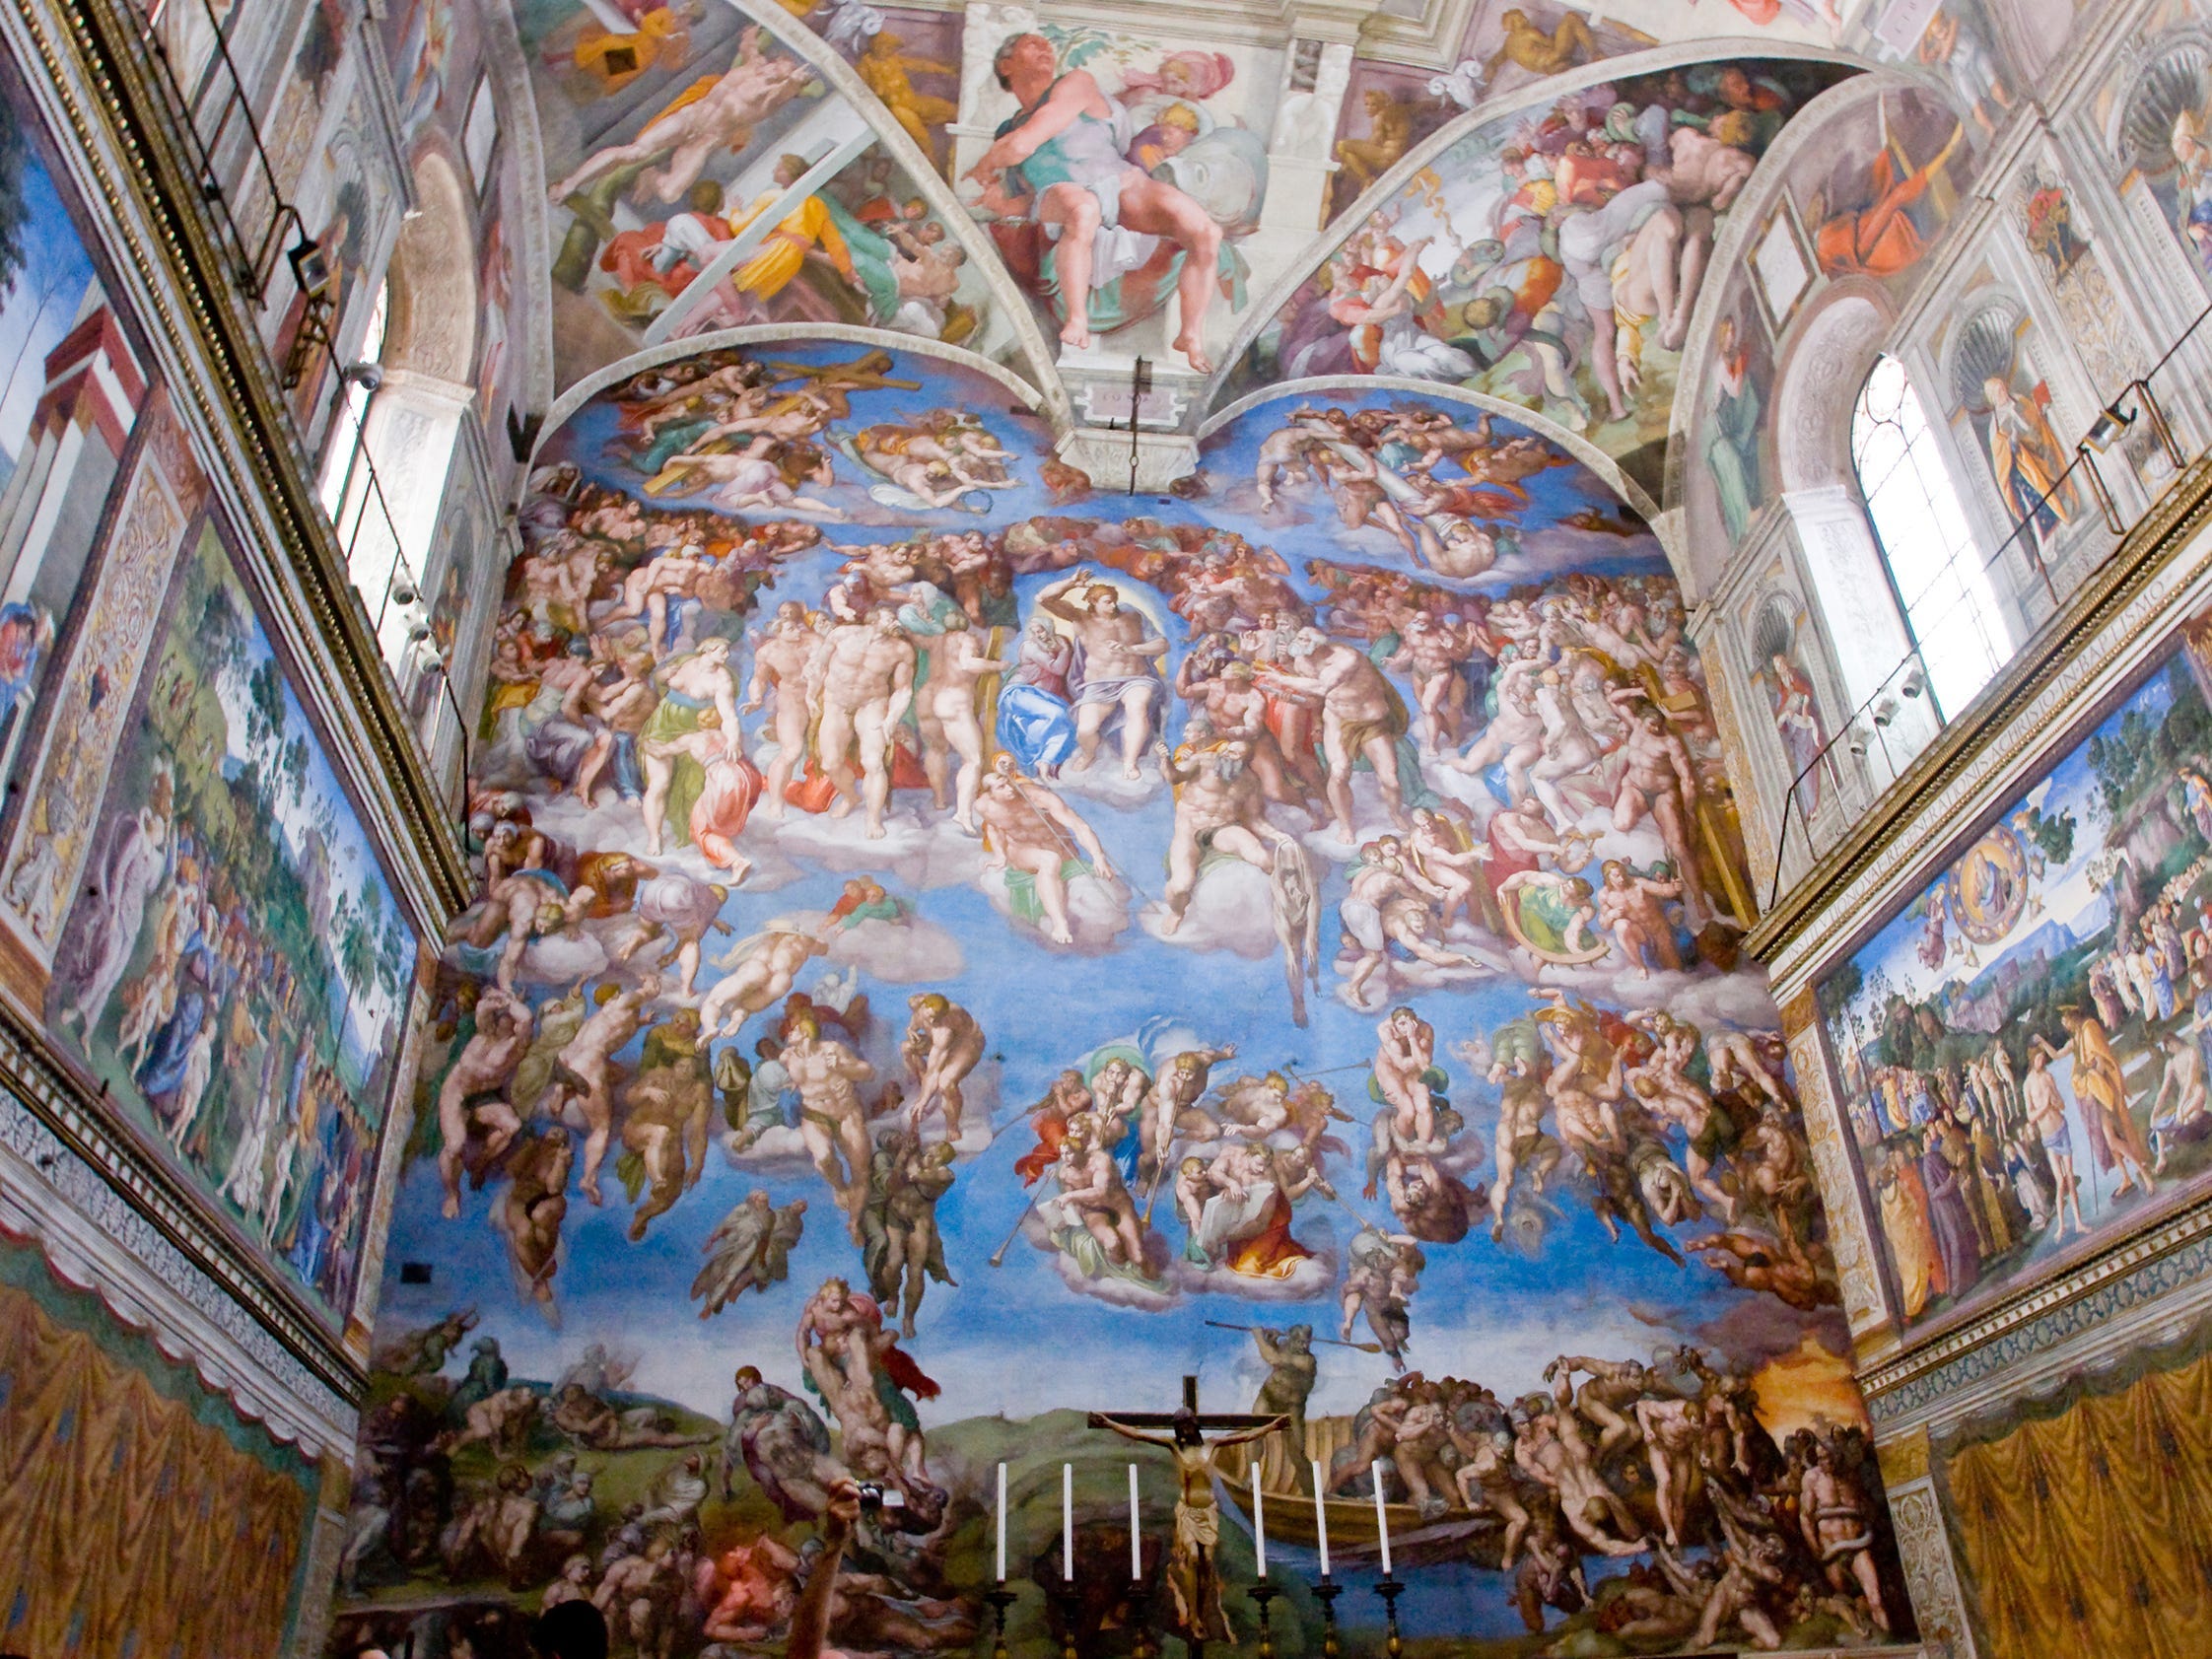 <p><span>Although the Vatican Museums are undeniably home to some of the world's most renowned art collections, they're almost always swarming with tourists. </span></p><p><span>The crowds and long queues can detract from your overall experience. In </span><a href="https://www.cntraveler.com/story/what-its-like-to-see-the-vatican-museums-minus-the-crowds"><span>peak season</span></a><span>, the Vatican easily sees 20,000 to 30,000 visitors a day. </span></p><p><span>It's virtually impossible to admire the art as you're shuttled through each gallery until everyone spills into the </span><a href="https://www.businessinsider.com/jason-momoa-apologized-after-taking-photos-inside-sistine-chapel-2022-5"><span>Sistine Chapel</span></a><span>. Even the bathroom lines can be a 30-minute wait. </span></p><p><span>Unless you are willing to </span>spend a lot of money on an <a href="https://www.walksofitaly.com/vatican-tours/key-masters-tour-sistine-chapel-vatican-museums/"><span>official tour </span></a>before the museums are open<span> to the public or </span><a href="https://www.businessinsider.com/what-its-like-visiting-banff-summer-off-season-2023-7"><span>visit in the offseason</span></a><span>, you should consider alternative attractions. </span></p>